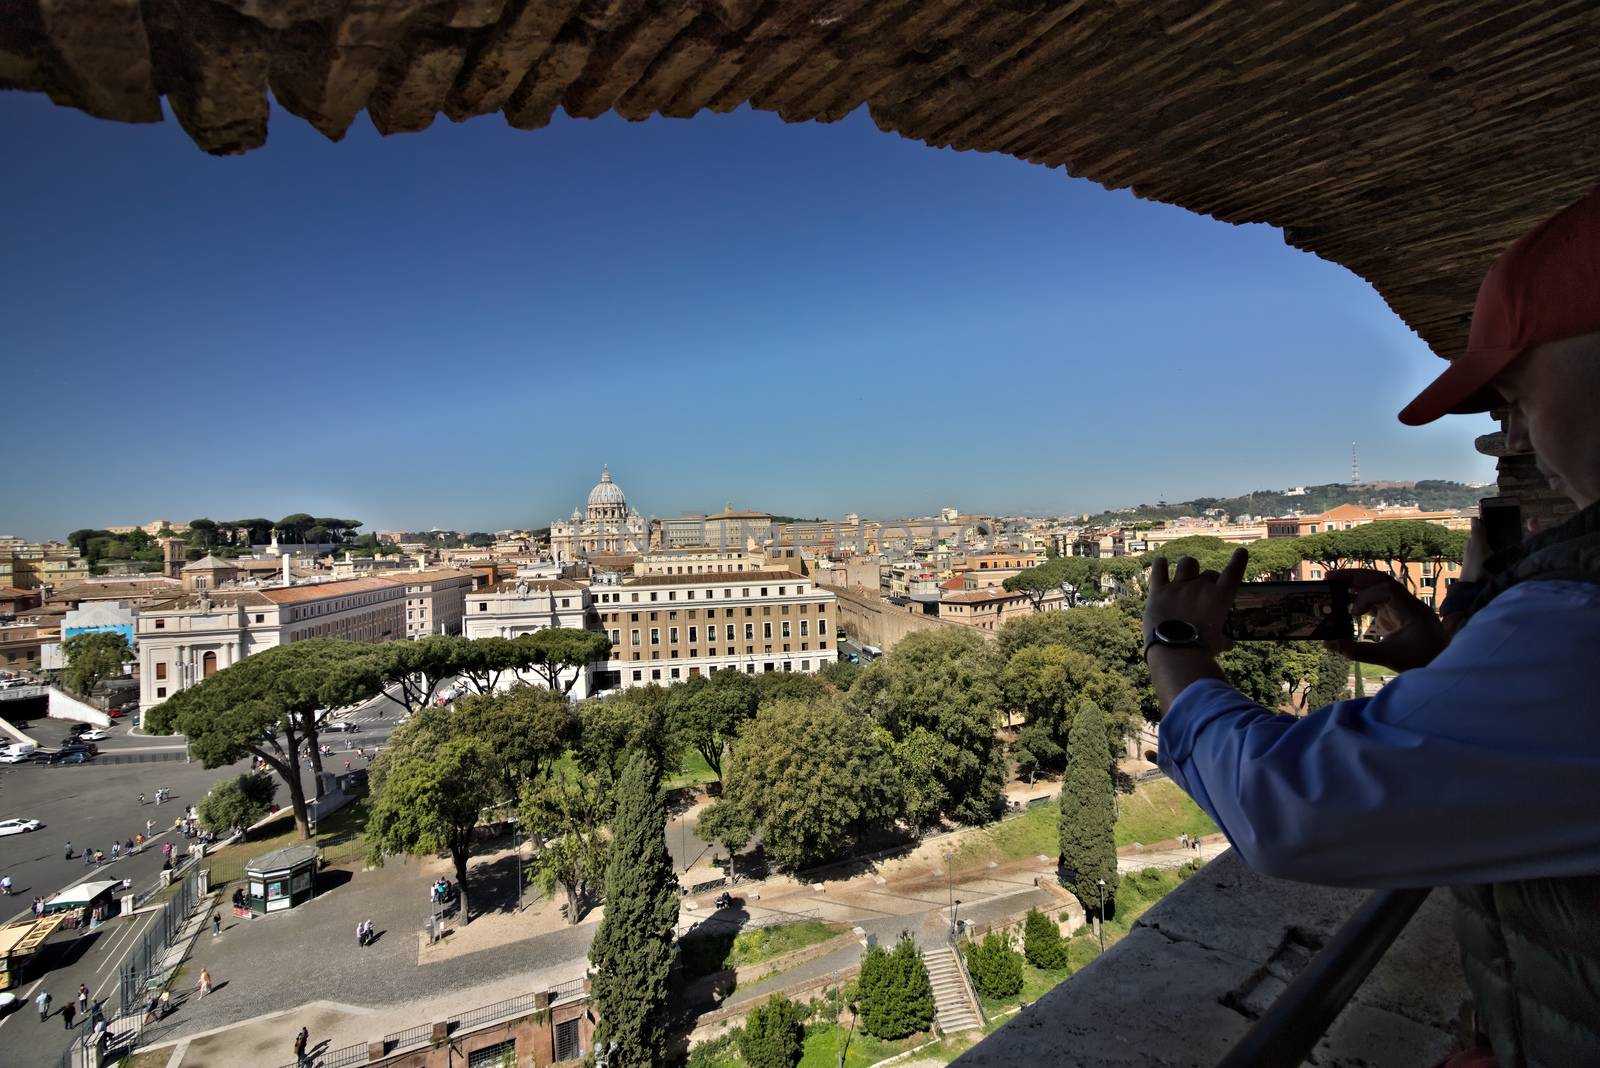 Rome, view with a view of the Vatican palaces taken from a window of Castel Sant'Angelo.